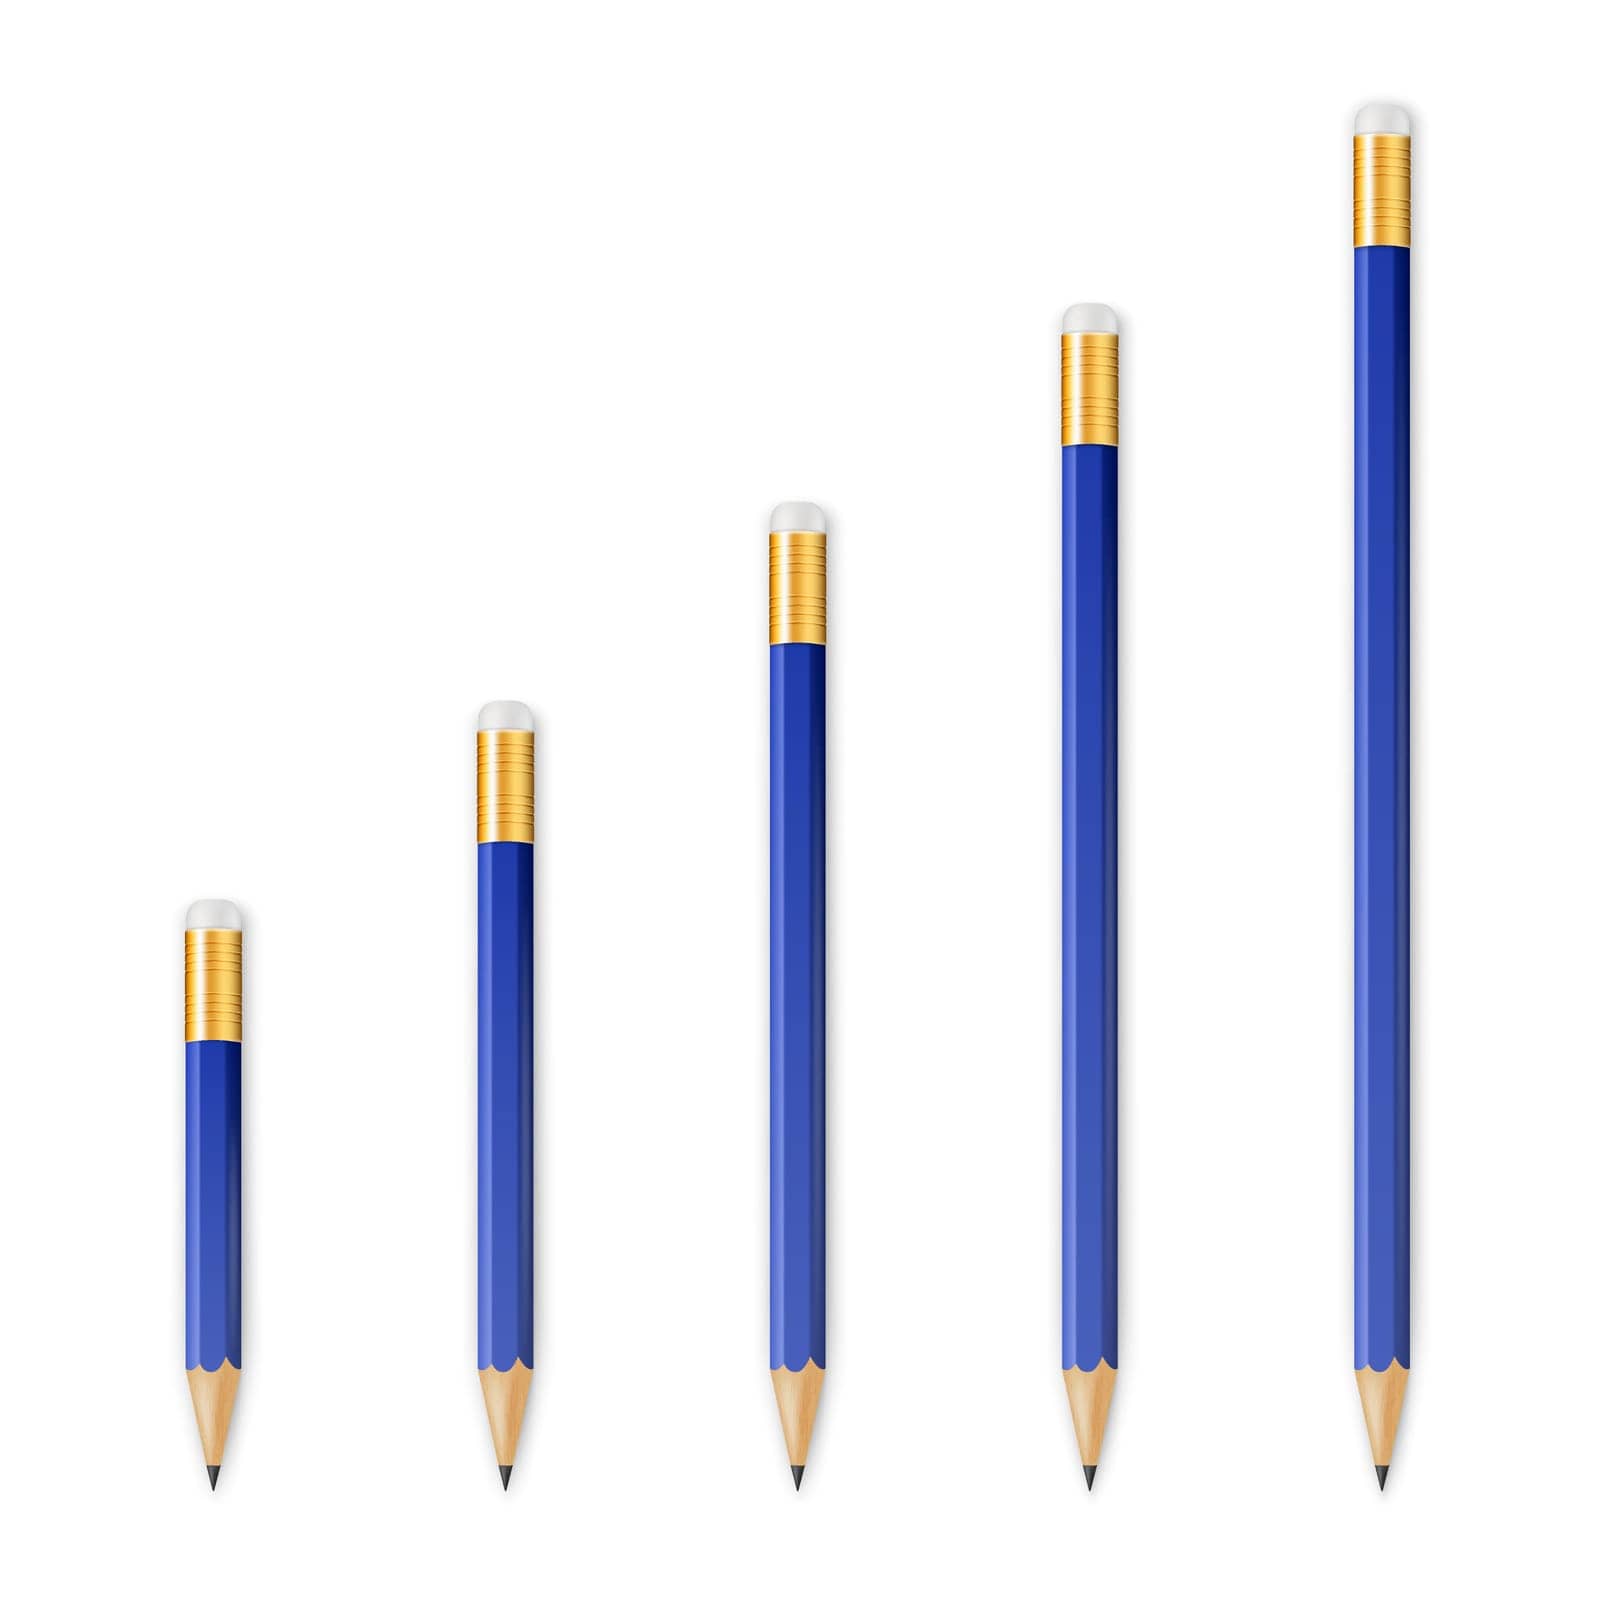 Blue wooden sharp pencils isolated on a white background. Vector EPS10 illustration.